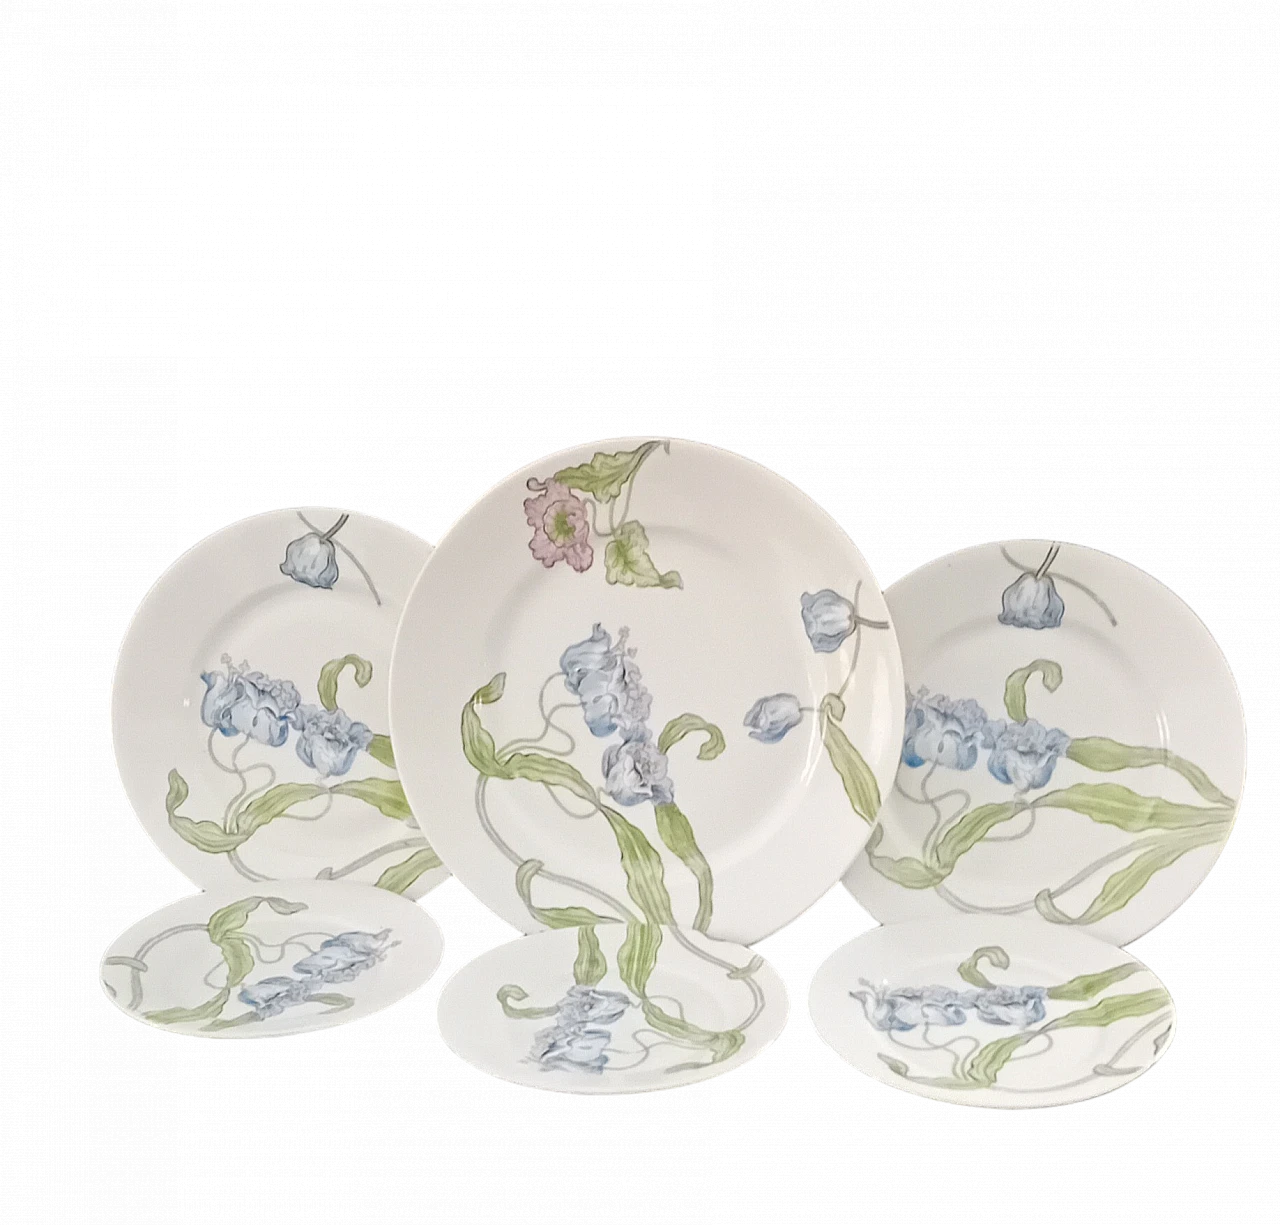 6 Art Nouveau porcelain plates in floral style by Ginori, 1920s 6